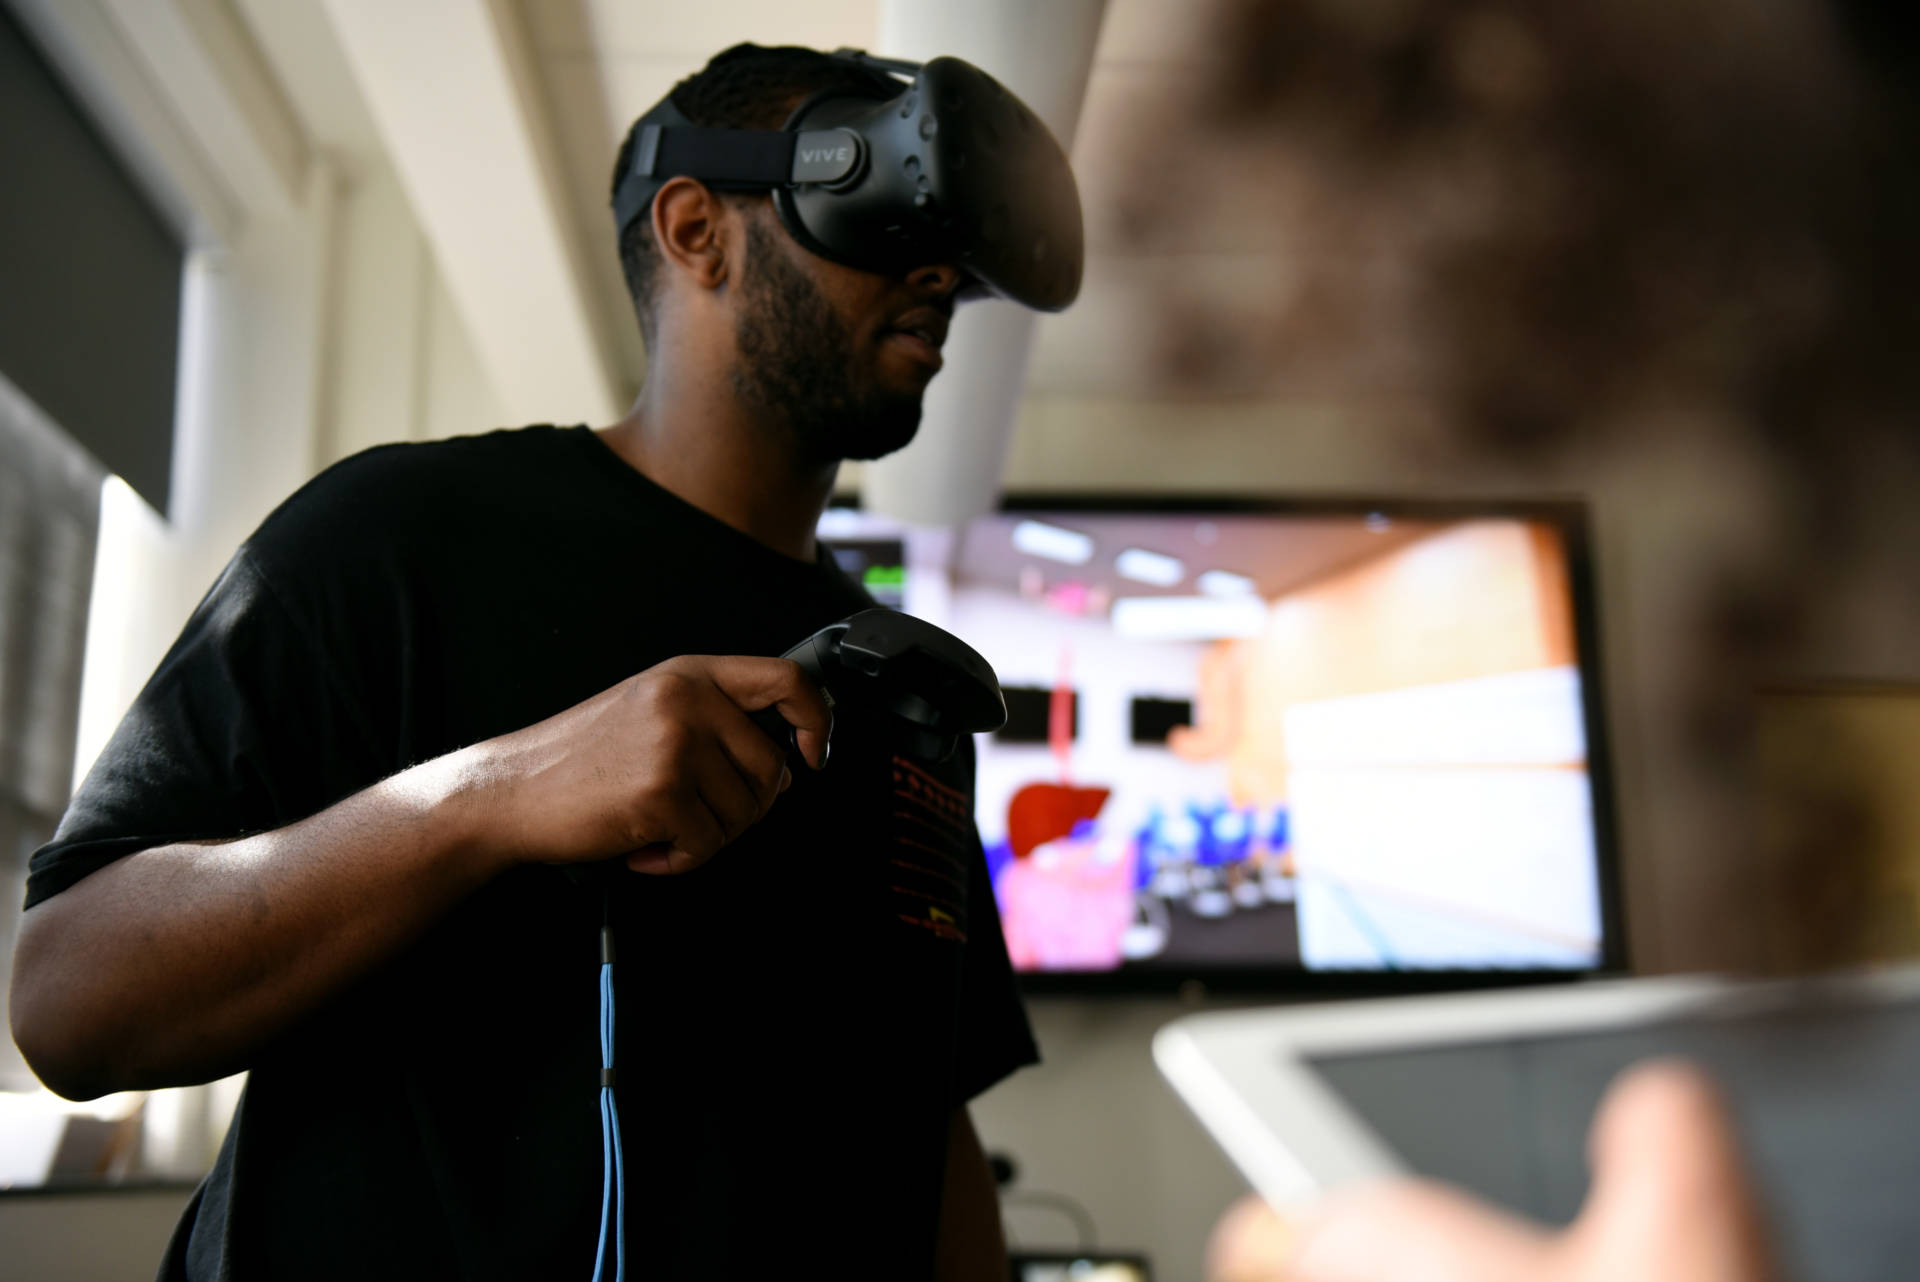 Eric Smith, a medical student at UC San Francisco uses virtual reality to study the digestive system aided by Sheyda Aboii, a fellow student. Lauren Hanussak/KQED